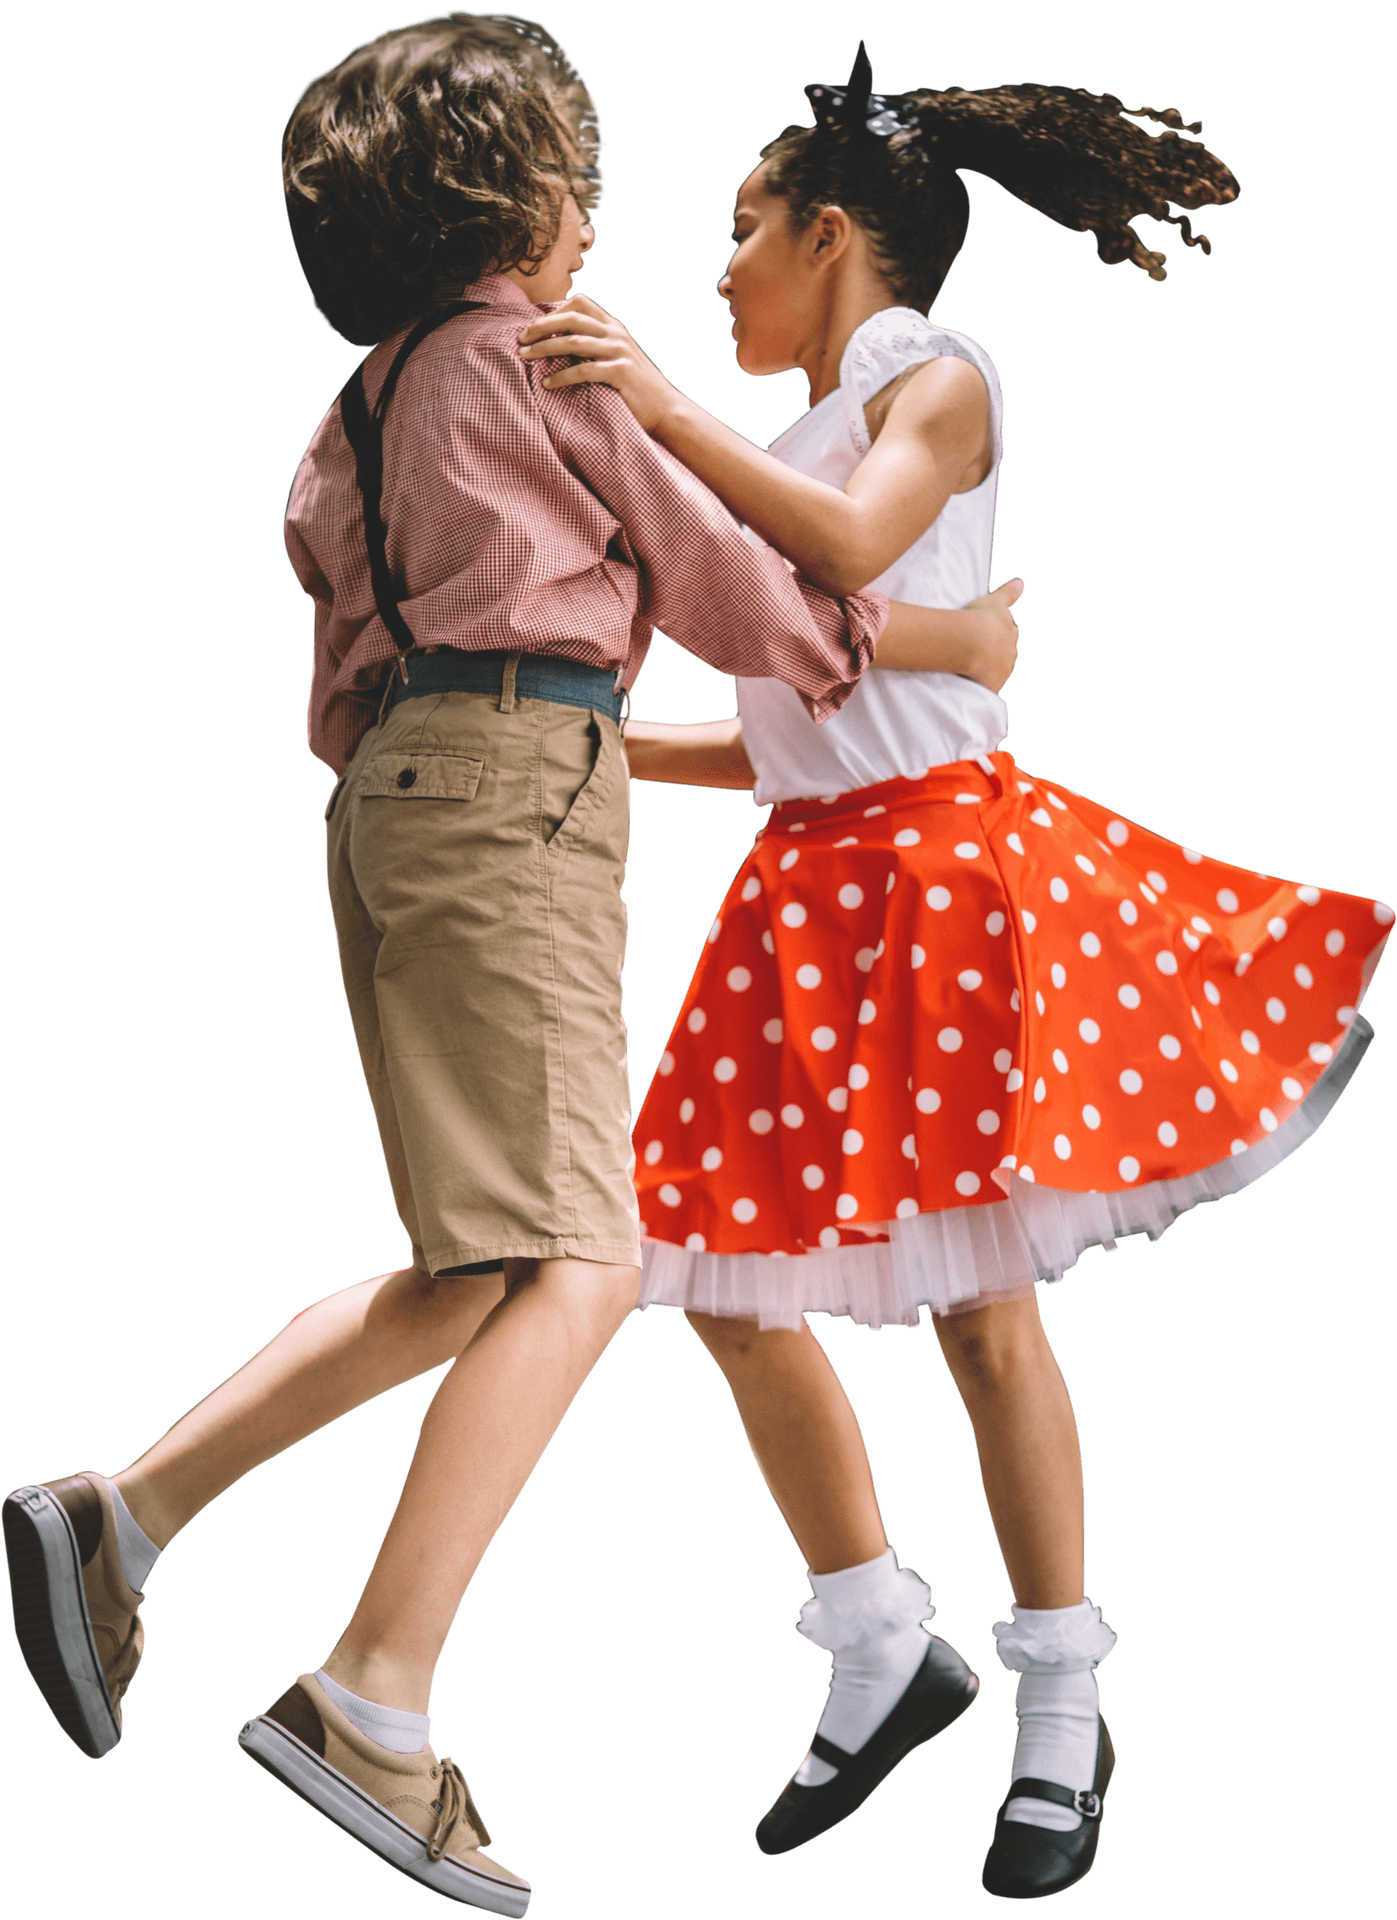 Retro Style Kids Dancing PNG image